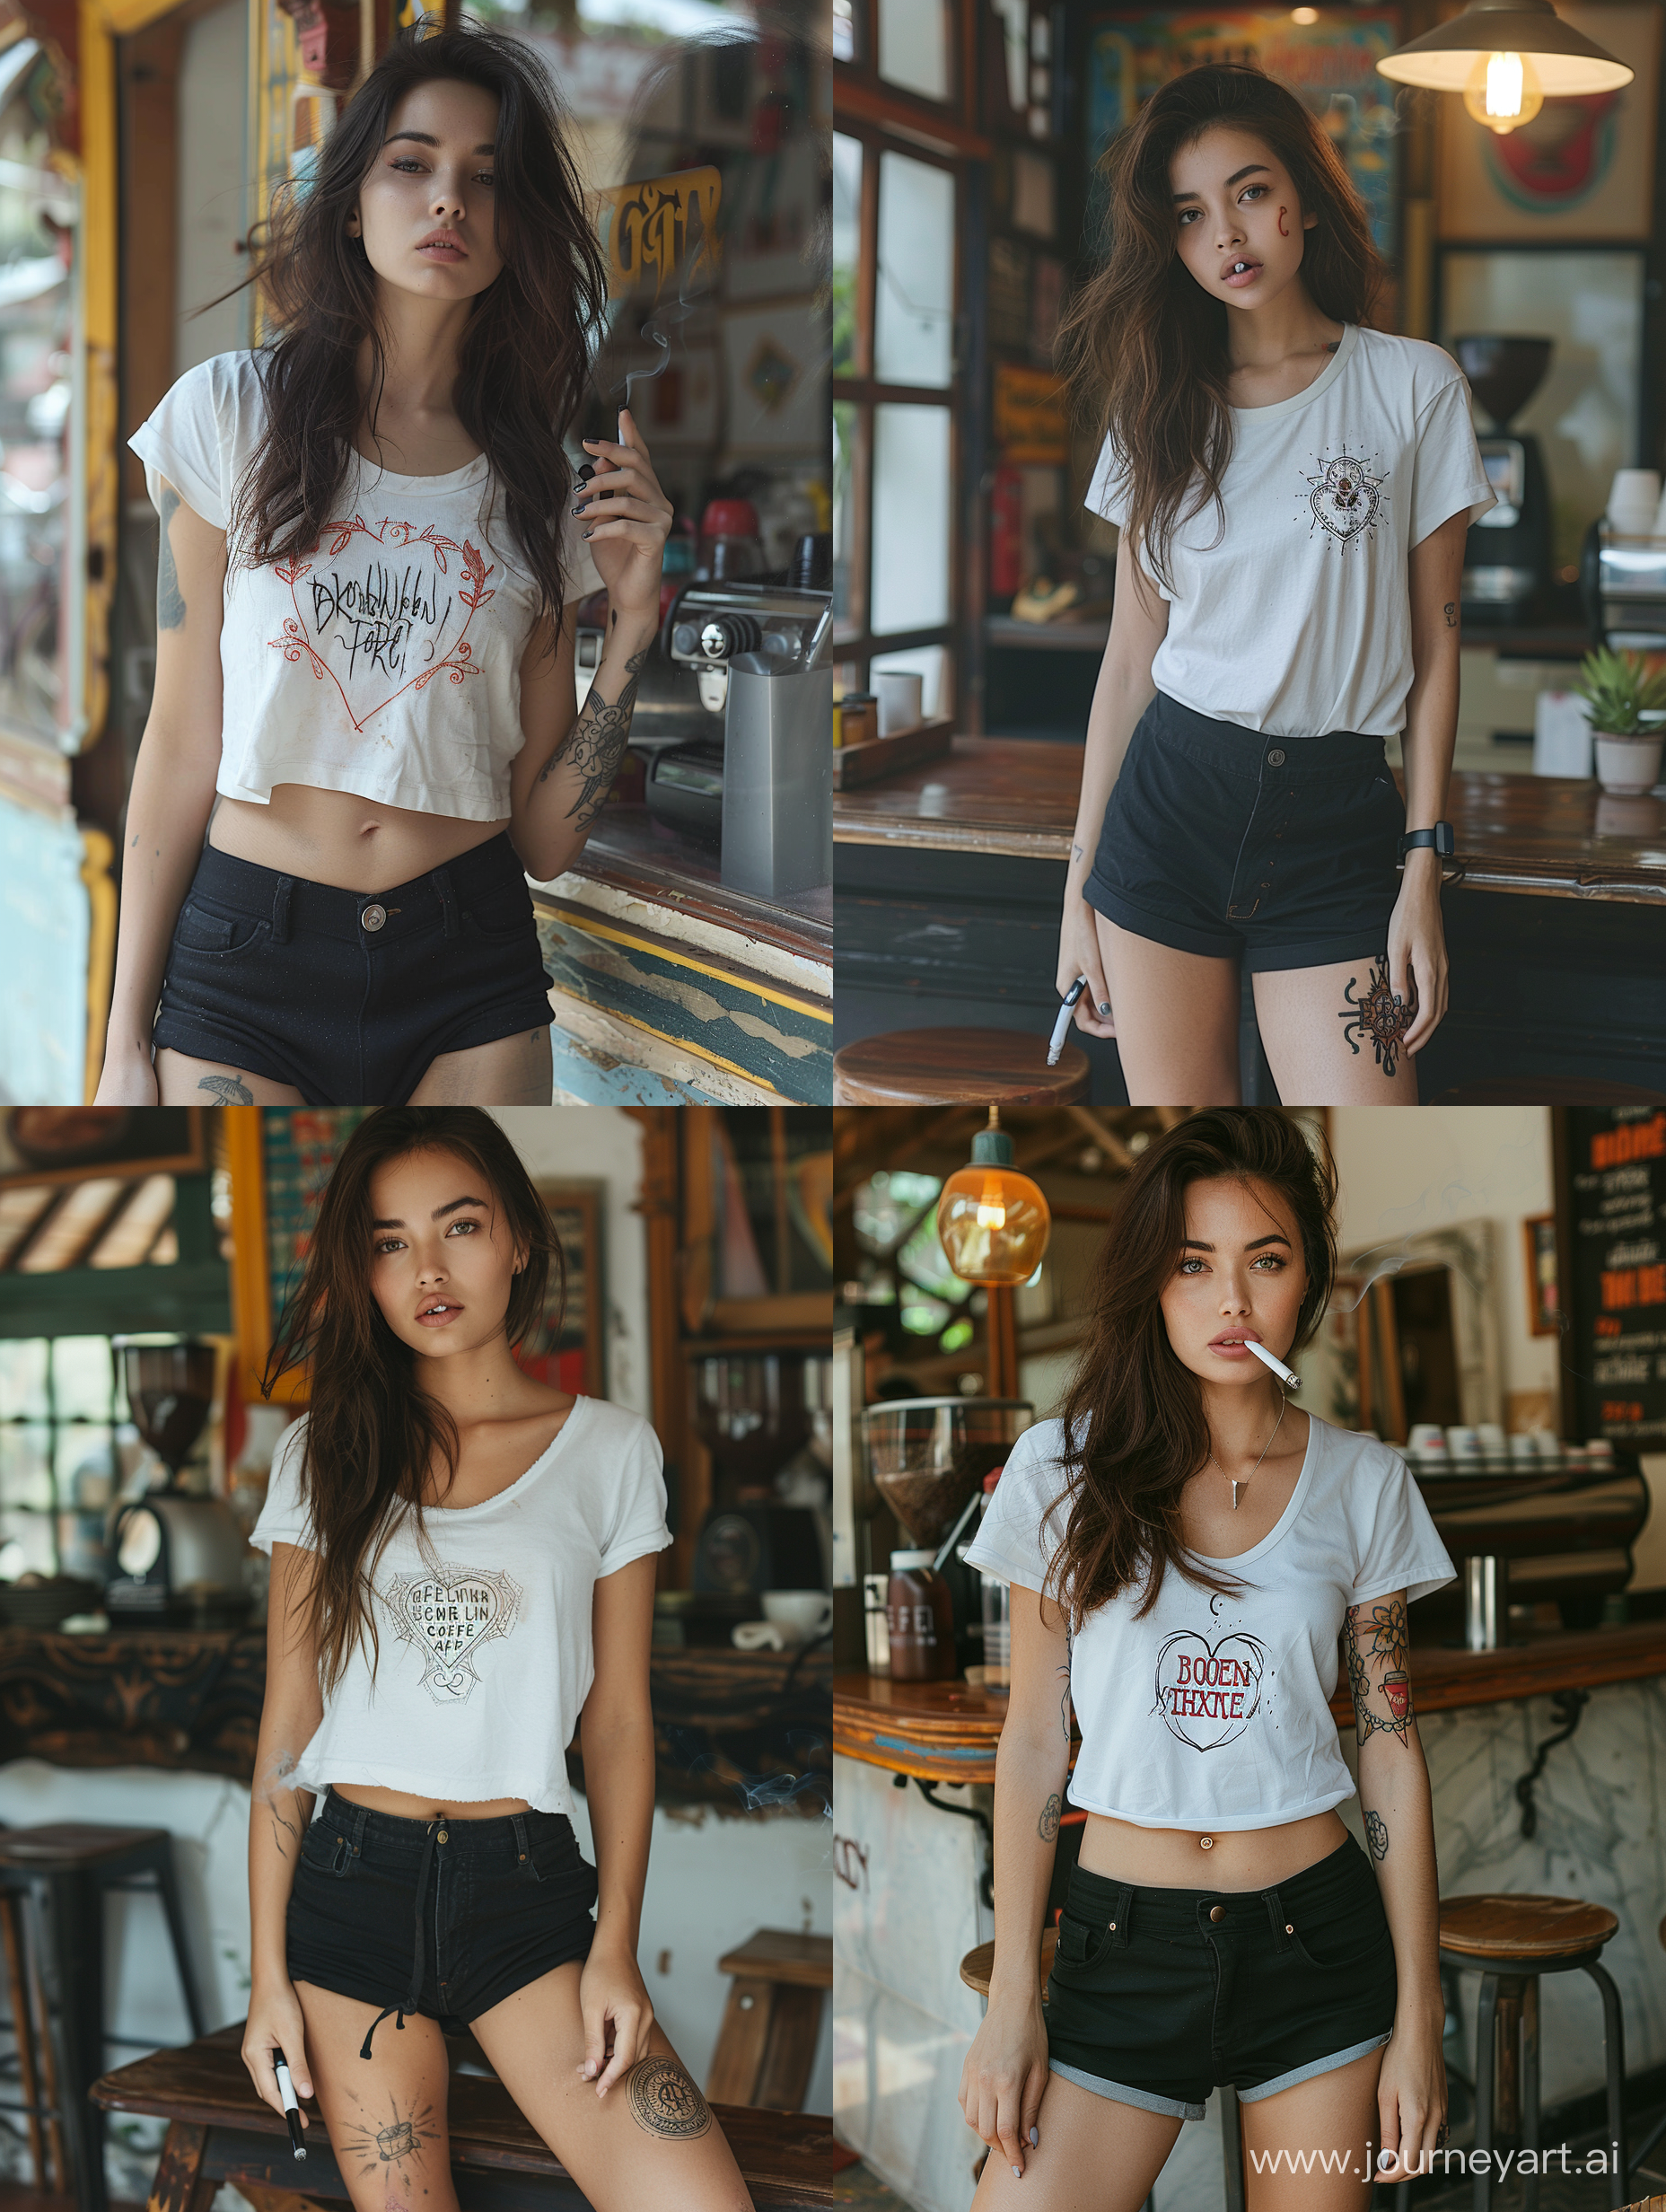 asian woman in white t-shirt ,black shorts,smoking electric cigarette,in front of coffee shop in nepal,thai pattern tattoo,typography "broken heart" --s 777